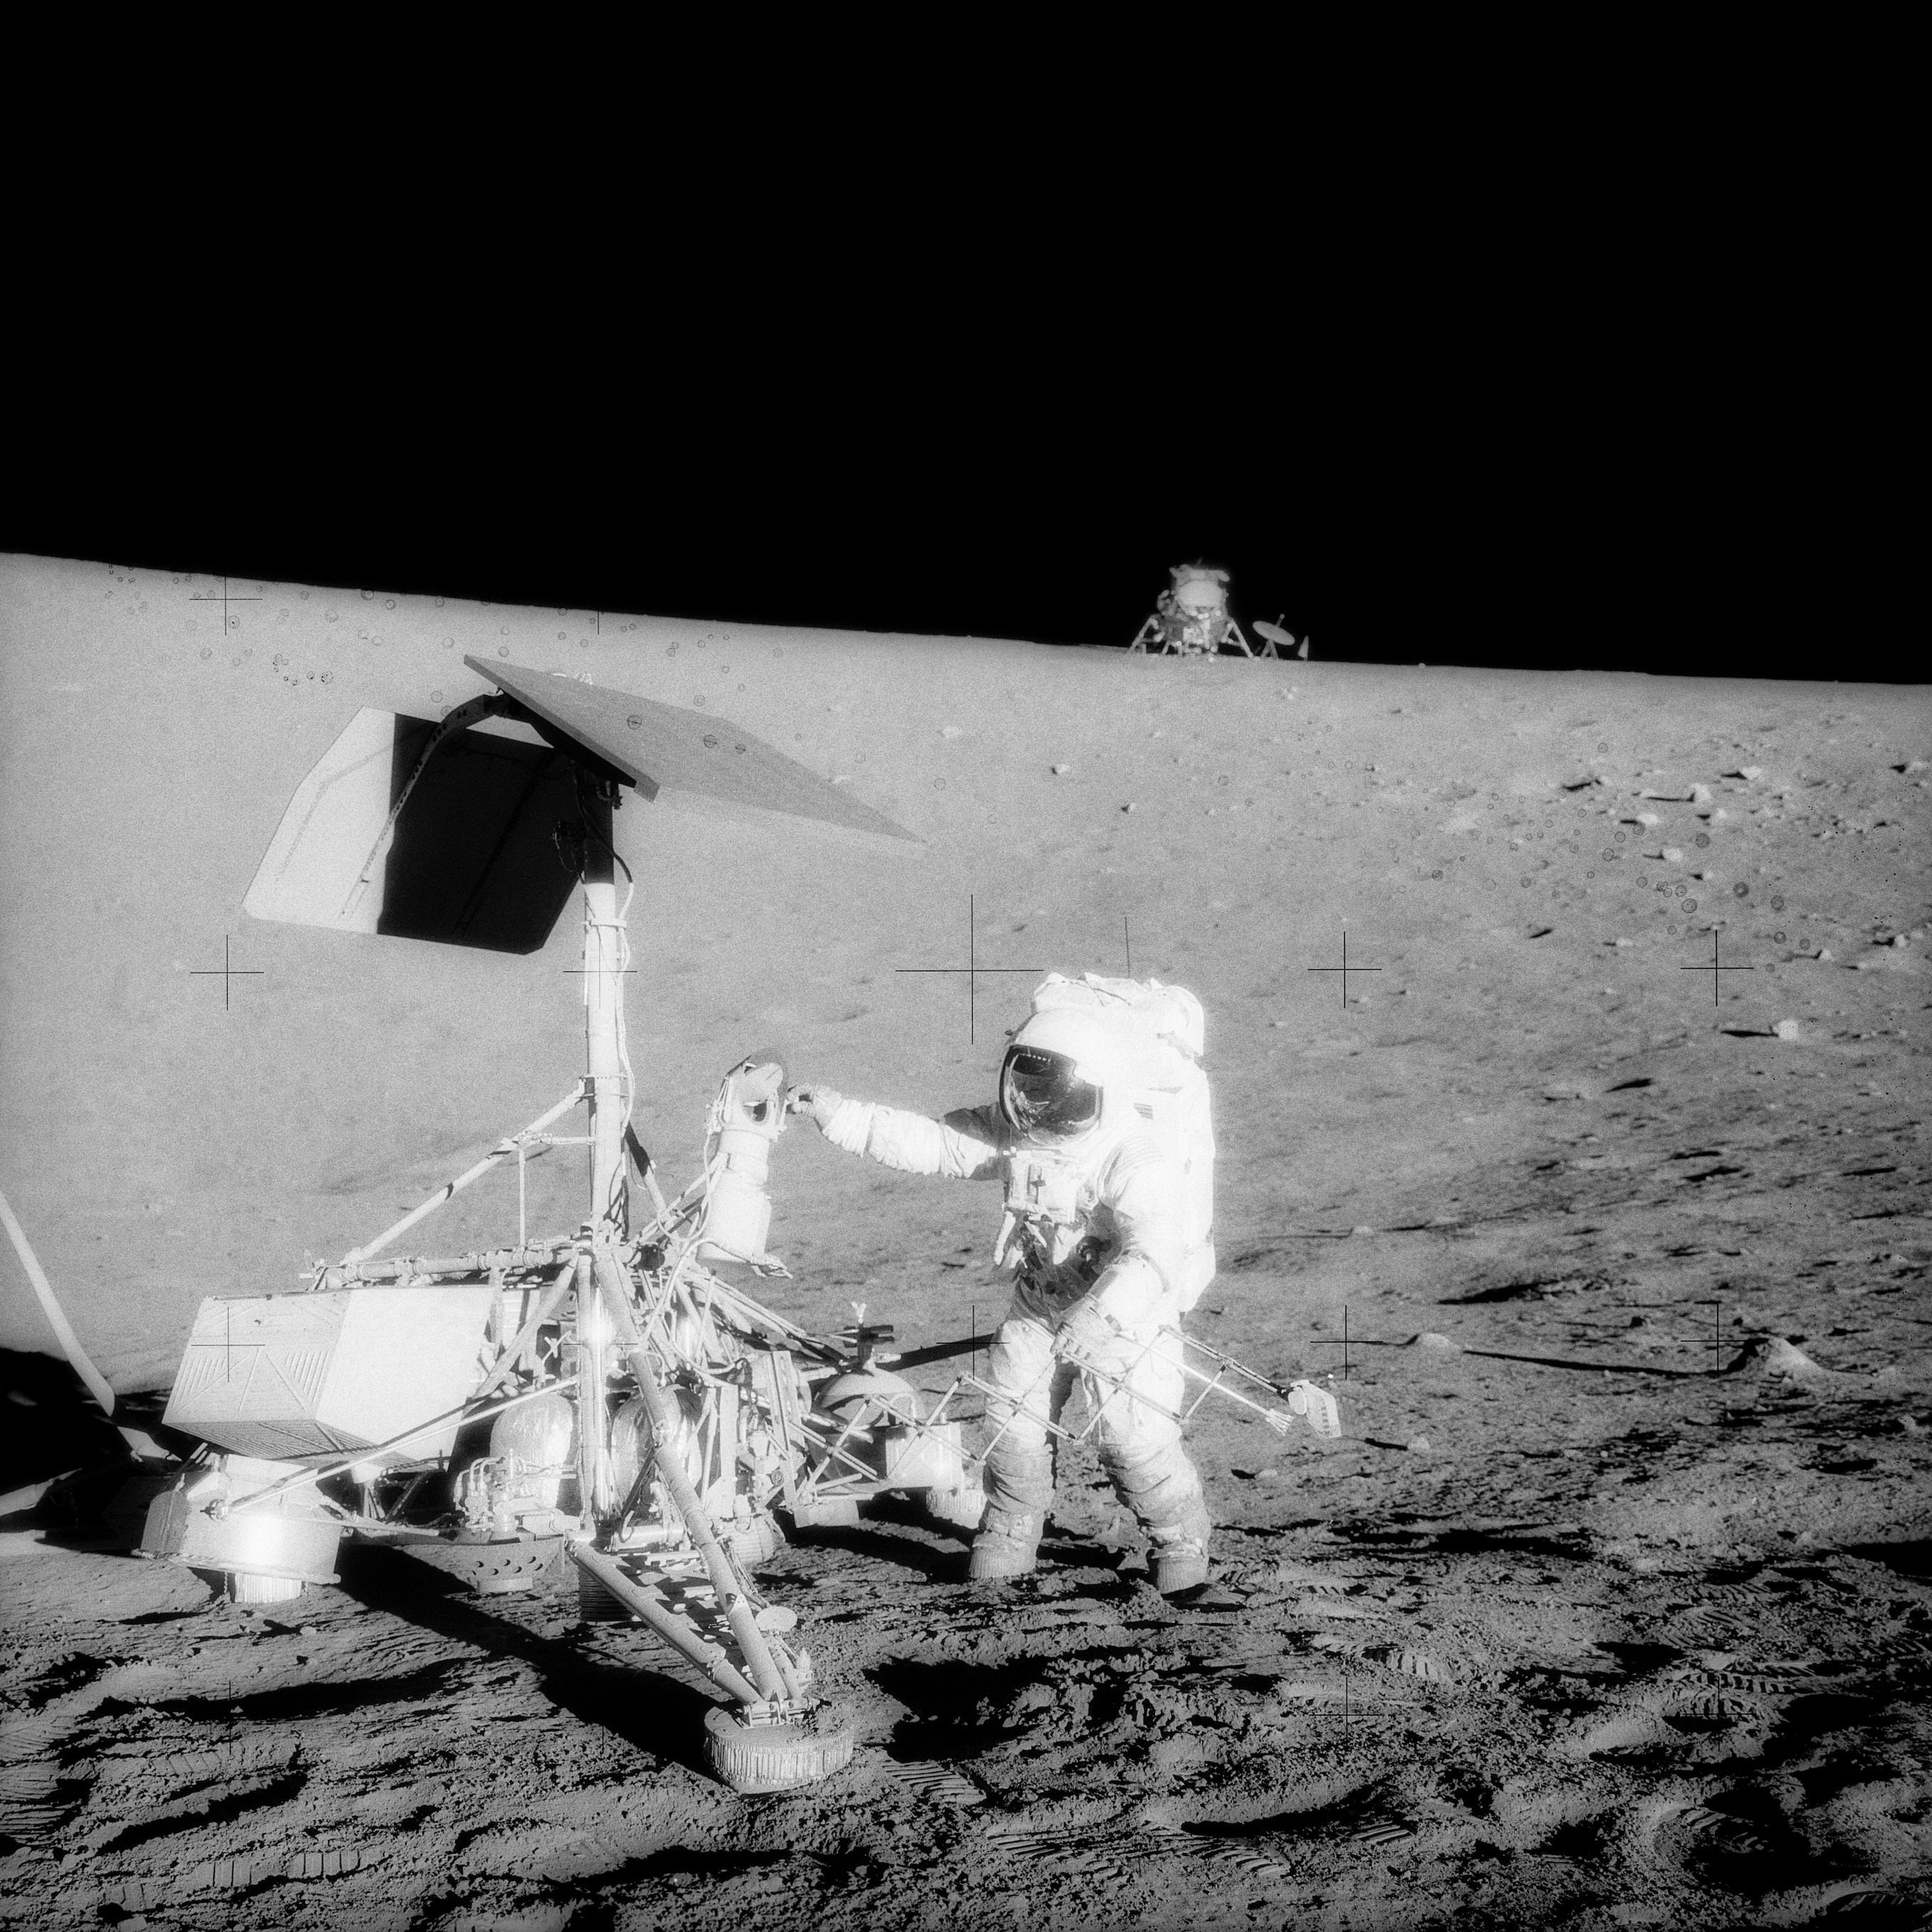 Al Bean photographed Pete Conrad at the Surveyor 3 spacecraft with the lunar module Intrepid on the horizon, November 20, 1969